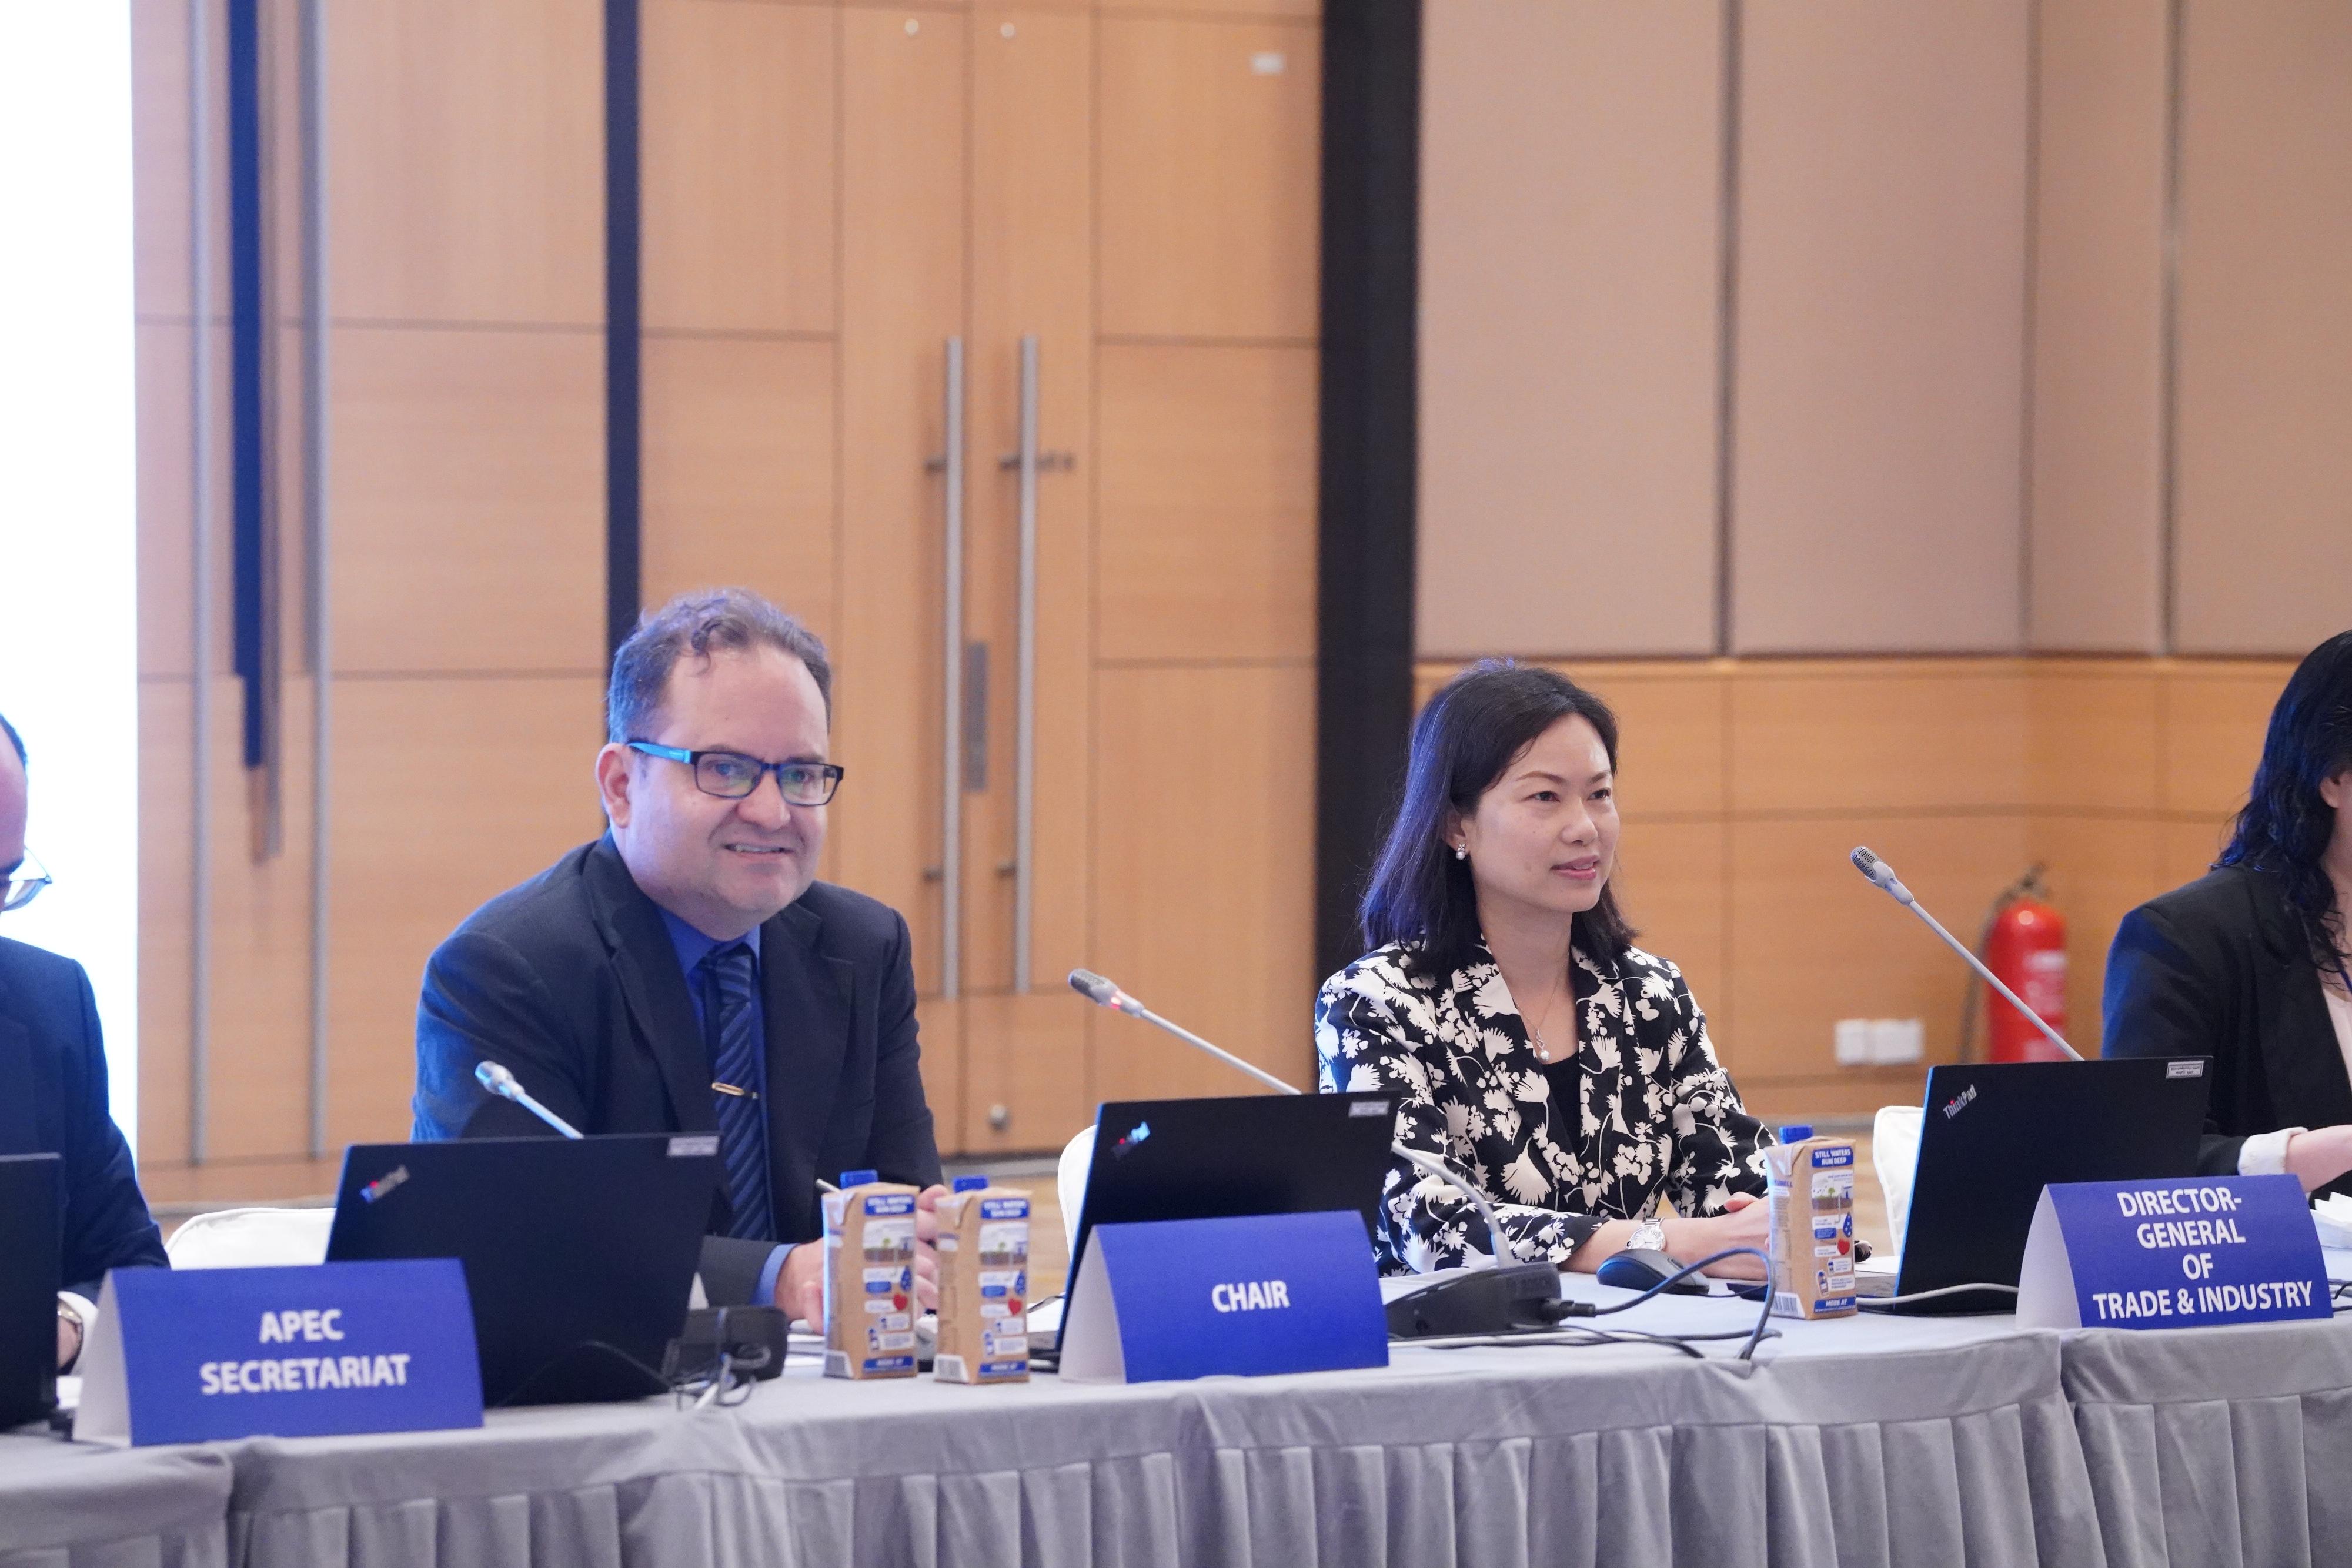 The Director-General of Trade and Industry, Ms Maggie Wong (right), attended the 55th Asia-Pacific Economic Cooperation Small and Medium Enterprises Working Group meeting on May 4.